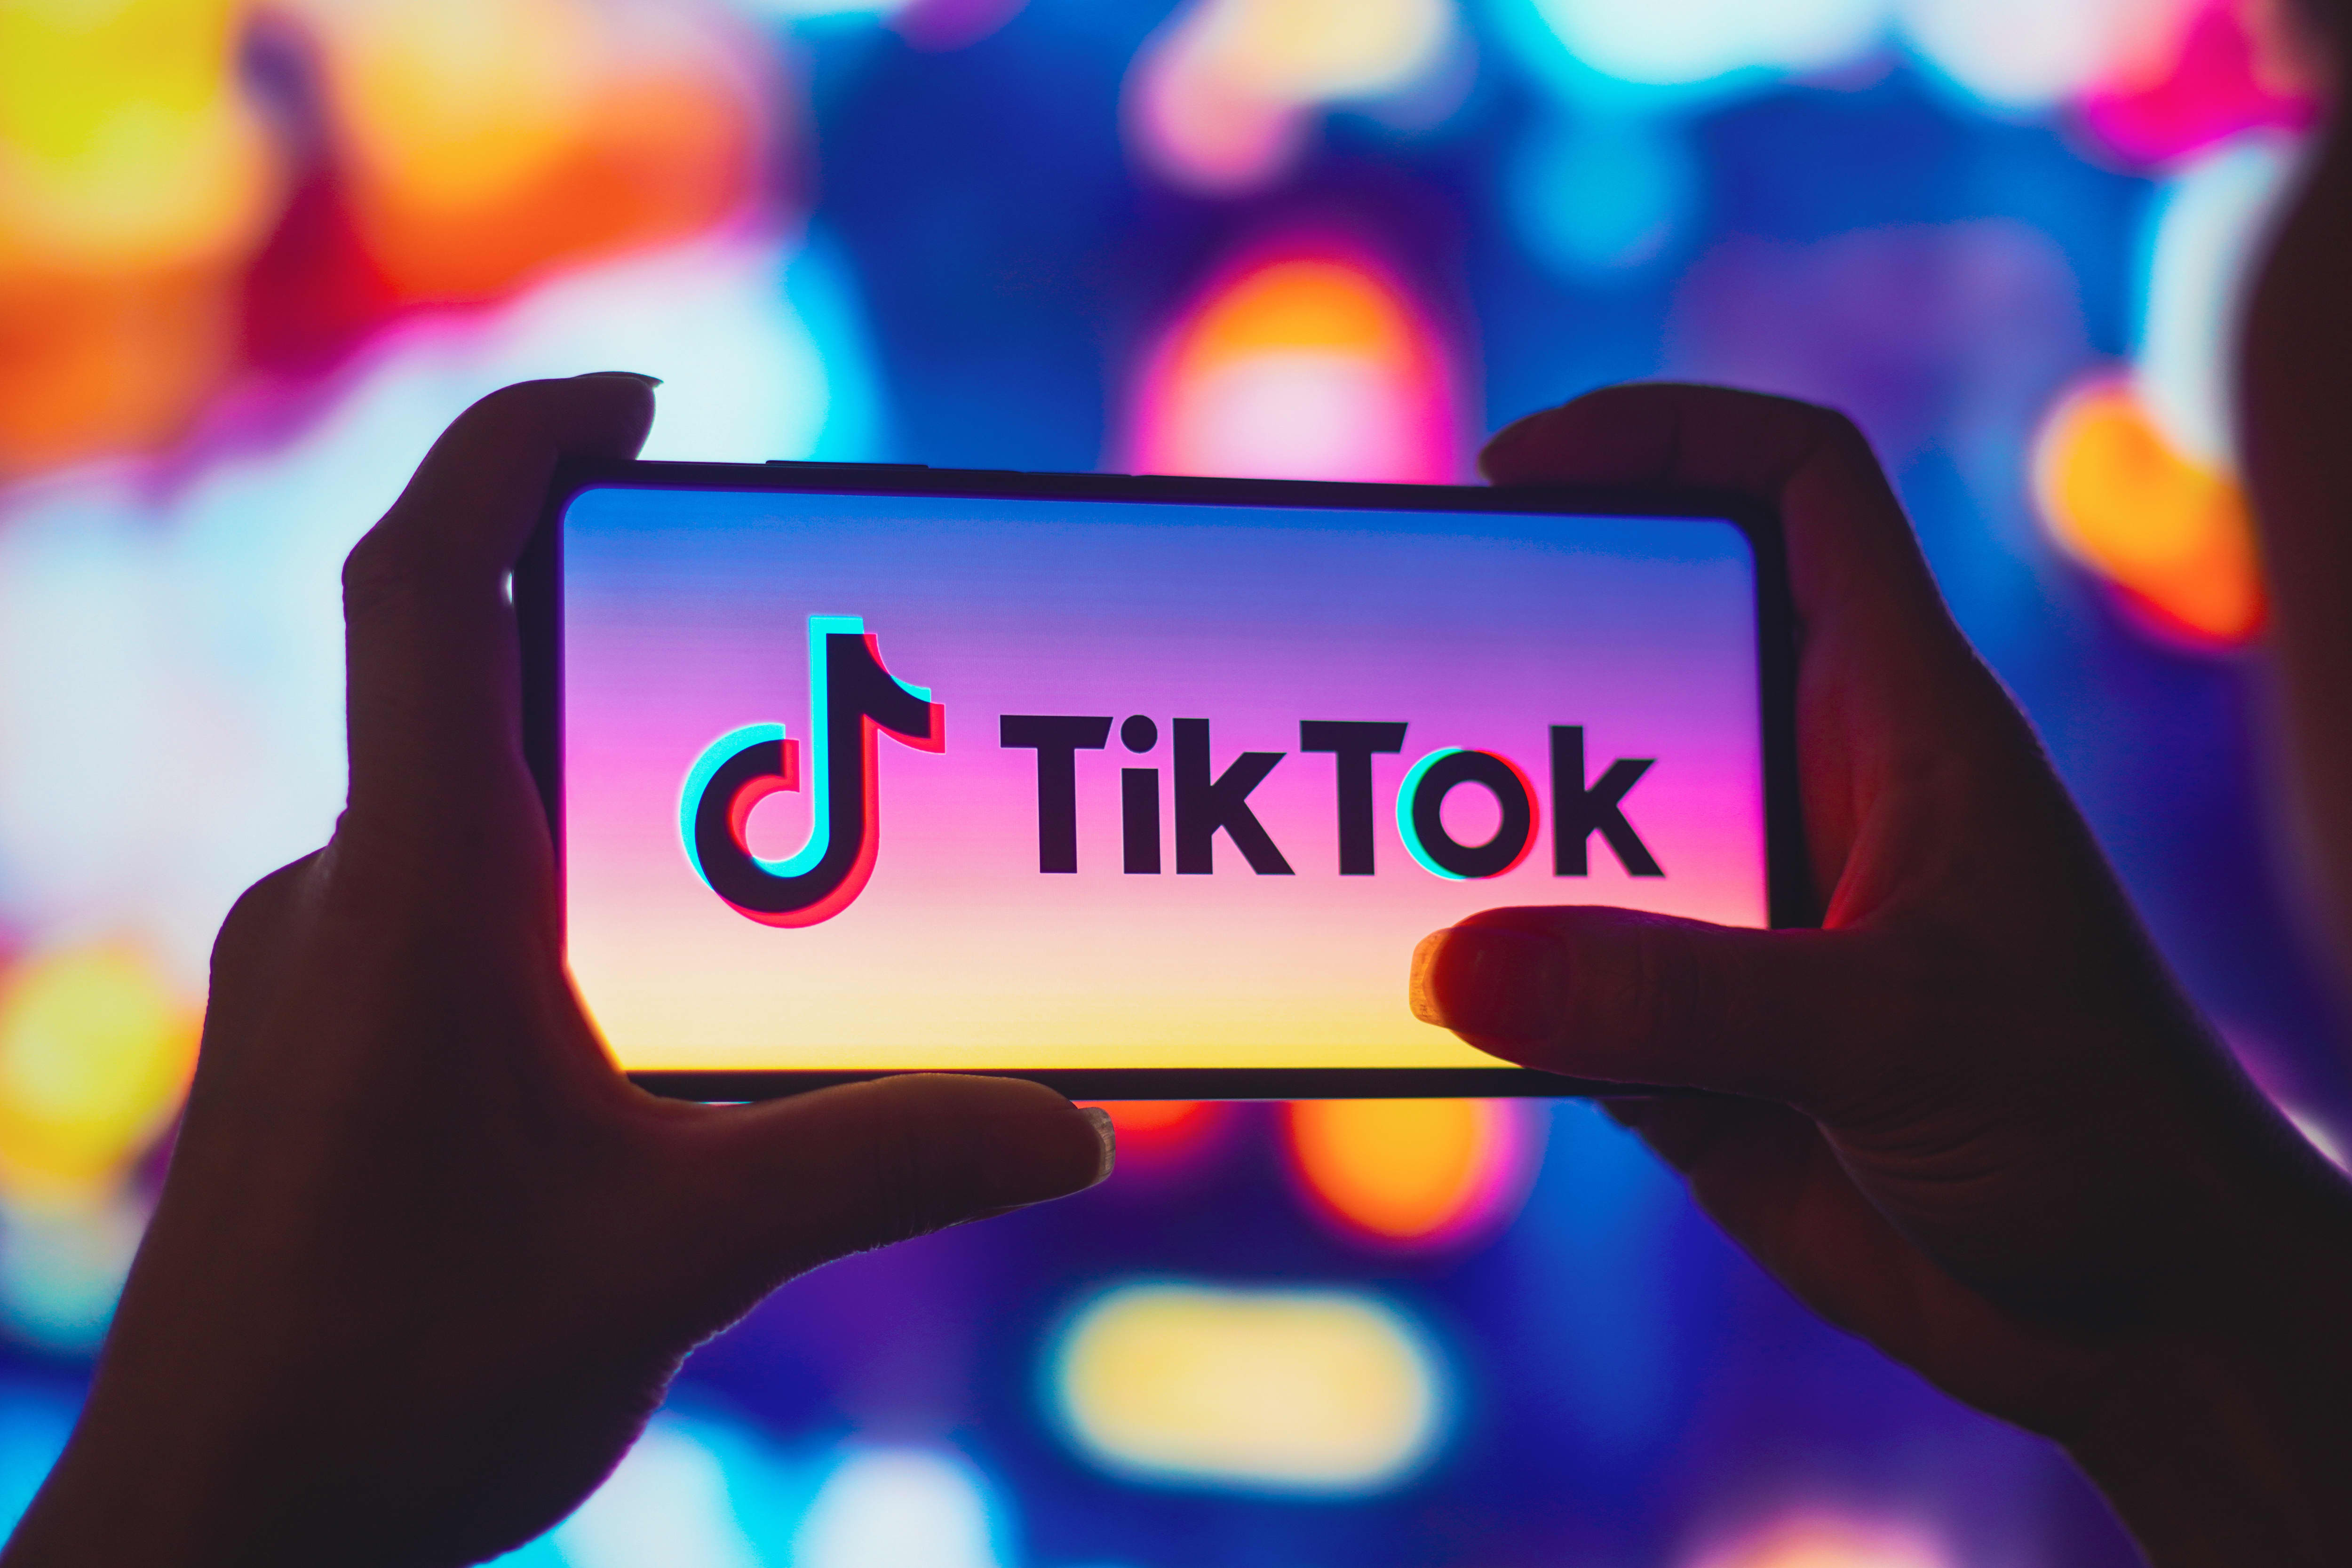 TikTok opened a transparency center as it faces renewed threats of  government bans - Vox